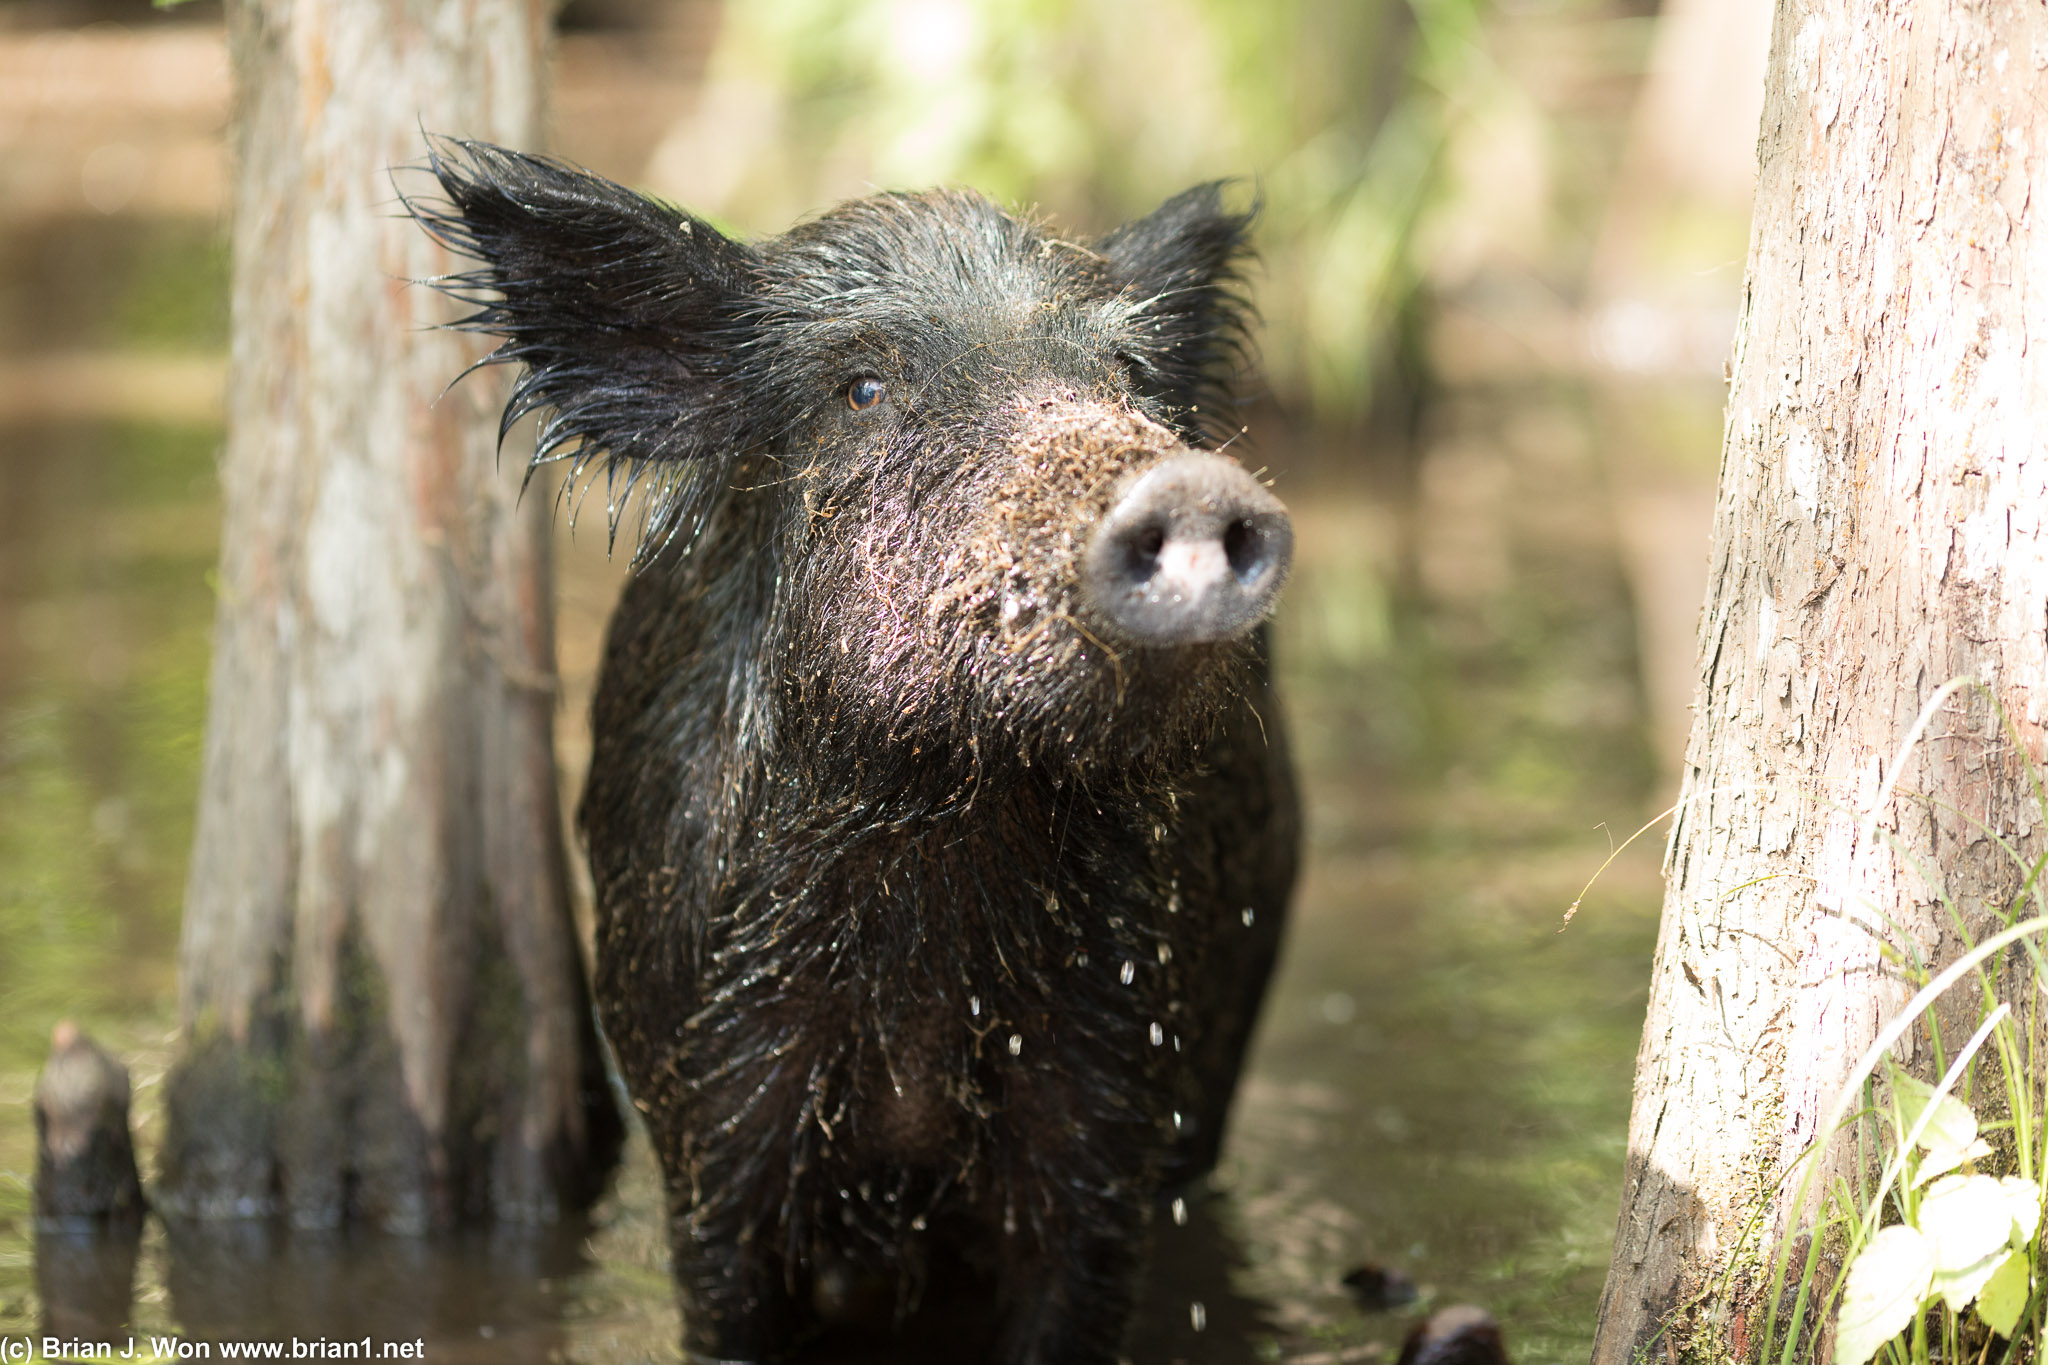 Swamp pig. (bacon!)